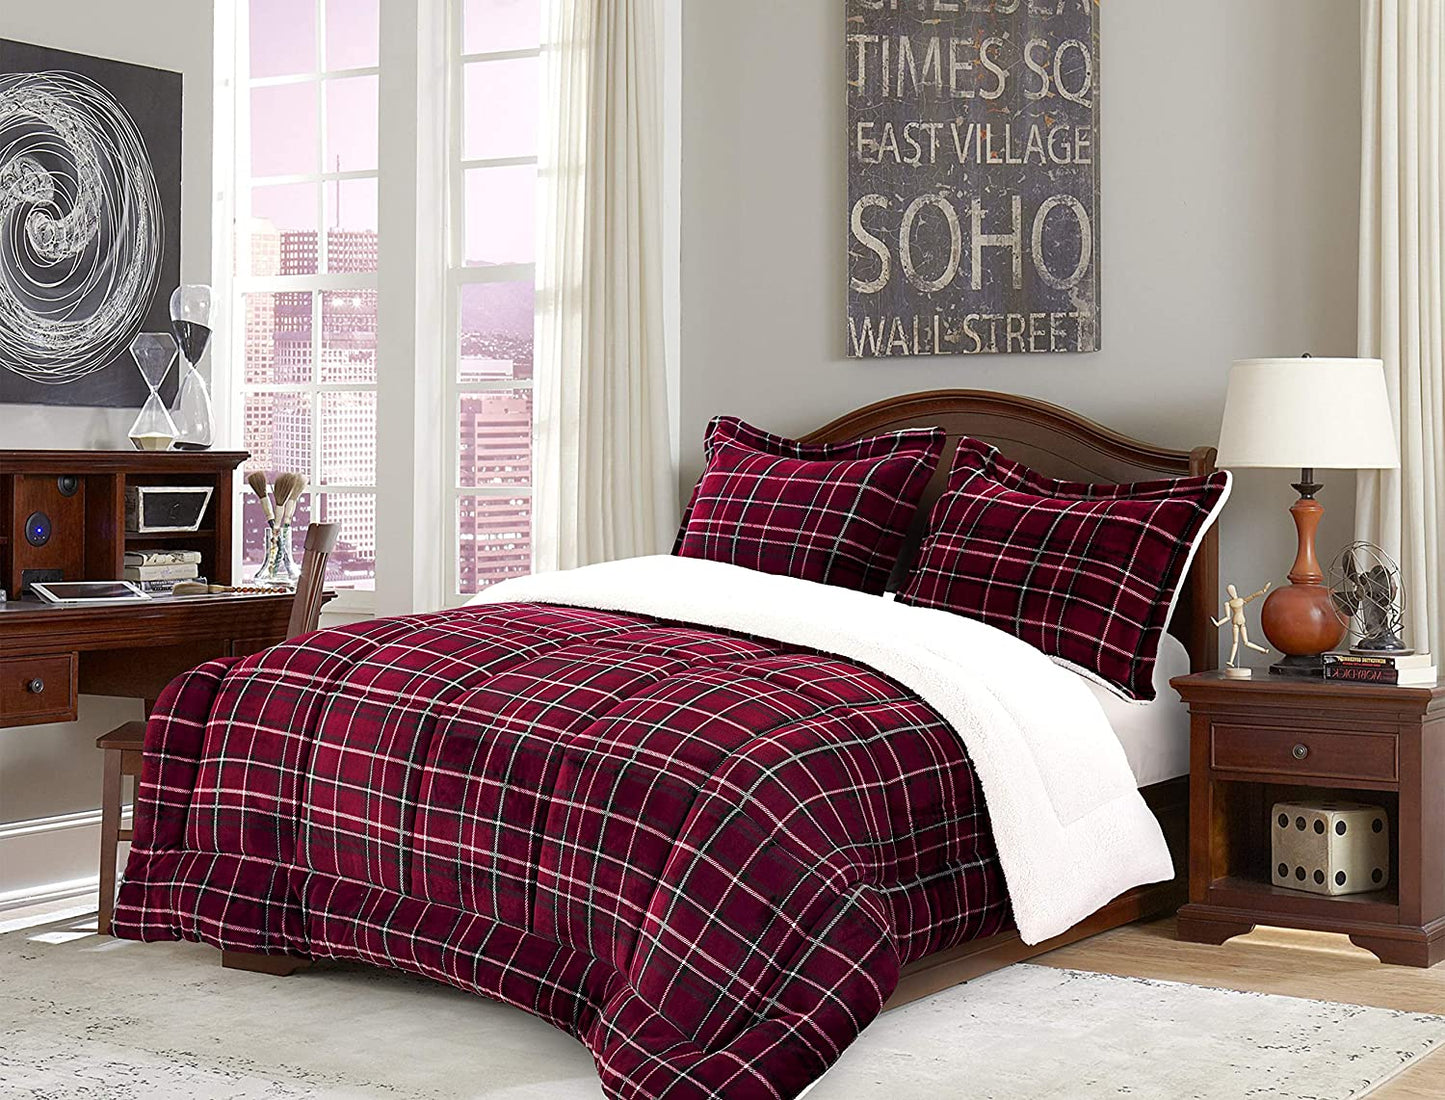 Softest, Coziest Heavy Weight Plaid Pattern Micromink Sherpa-Backing Premium Quality down down Alternative Micro-Suede 3-Piece Reversible Comforter Set, King/Cal King, Burgundy